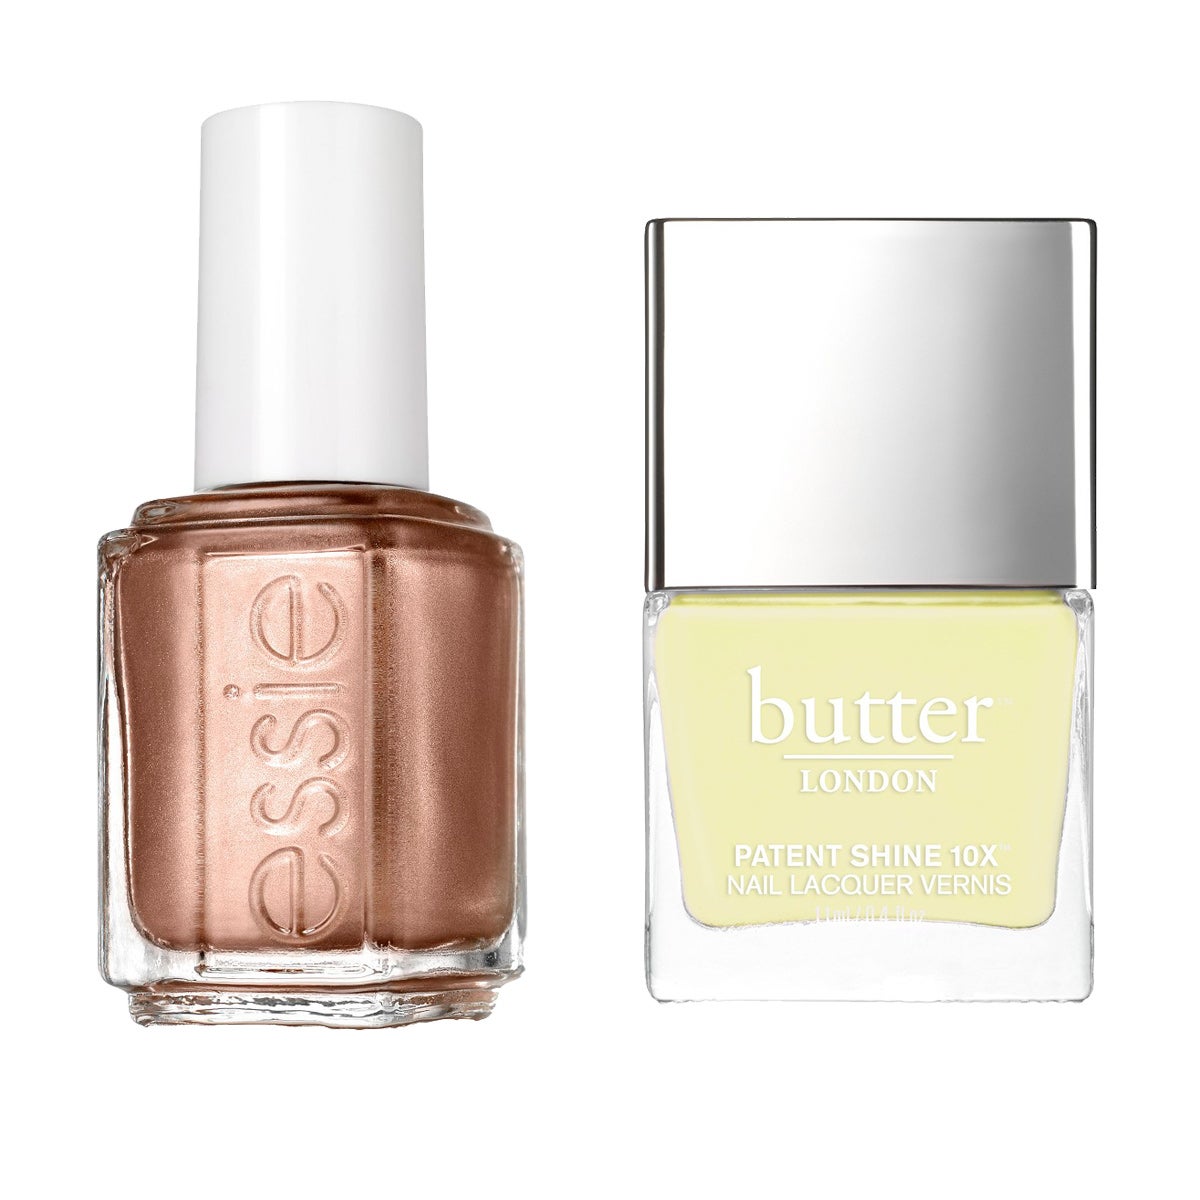 7 Mani & Pedi Nail Polish Combinations to Try this Summer
